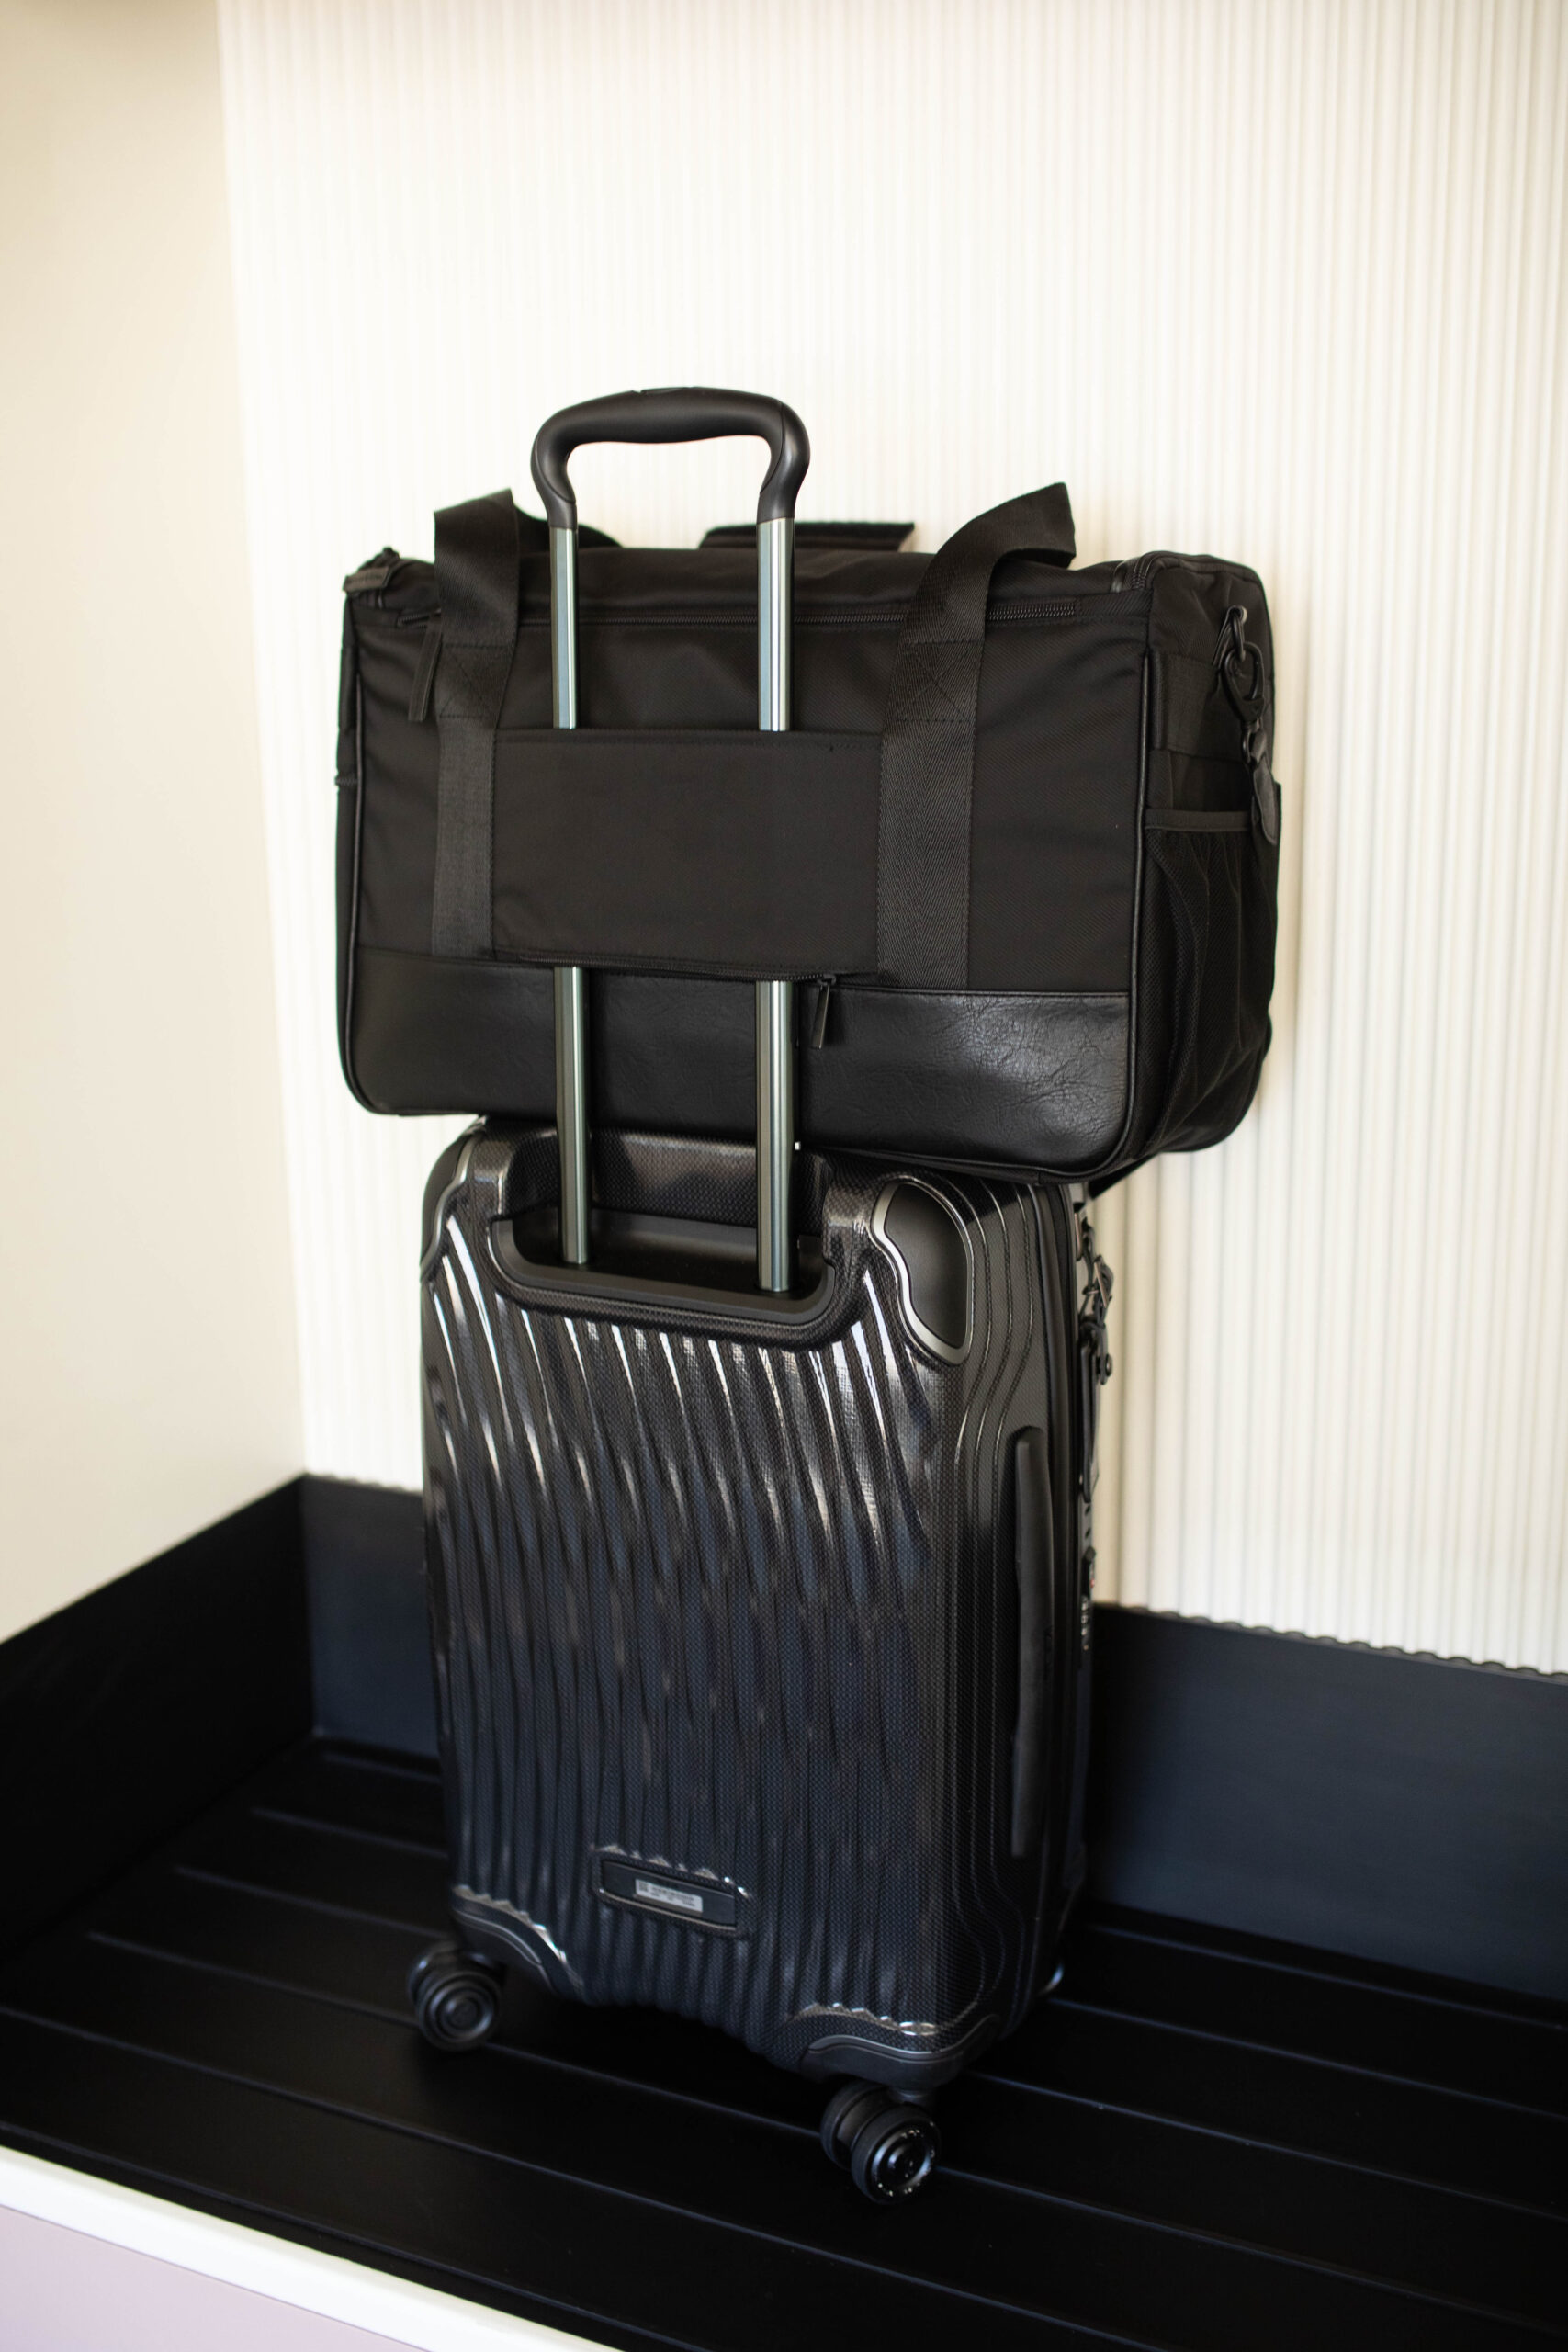 Béis Hanging Duffle Review, KatwalkSF, Luggage Review, Tumi luggage, Beis duffle